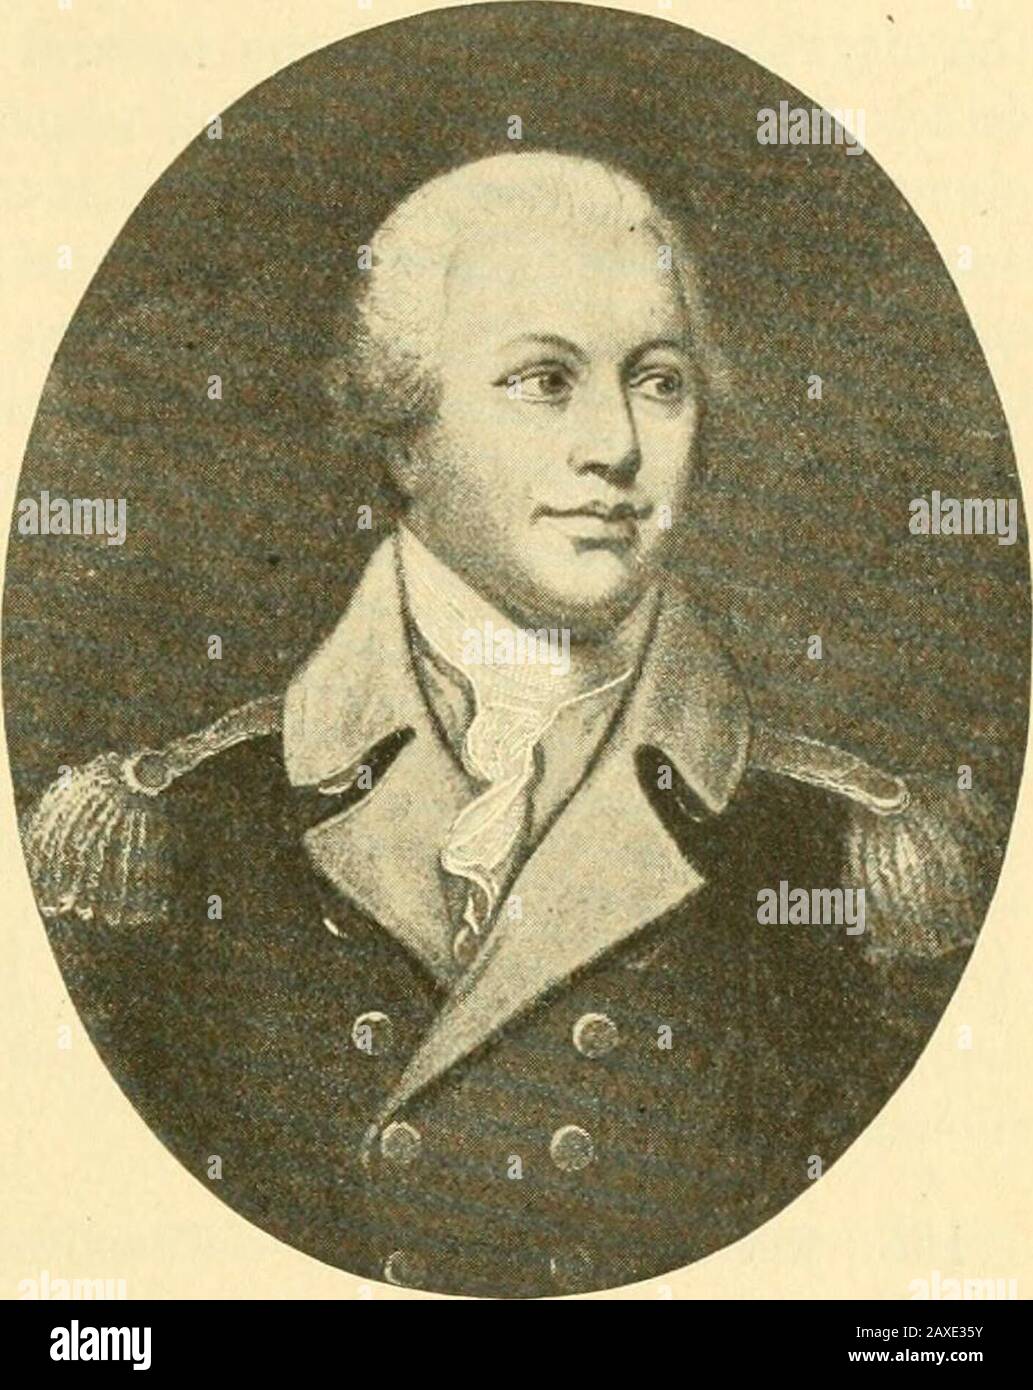 A history of the United States . e was suddenlystricken with fever and the command was transferred toGeneral Israel Putnam,- with Generals Sullivan and Stirling 1 Born, 1742; died, 1786. Member of the Rhode Islaud assembly in 1770;joined a military company in 1774; became brigadier general in 1775; majorgeneral in 1776; showed great military talents at Dorchester Heights, Brook-lyn, Trenton, Princeton, Brandywine, and Germantown; succeeded Gates inthe South, 1780, and by his strategic skill in opposing Cornwallis and LordRawdon, cleared the South and drove Cornwallis into the position which re Stock Photo